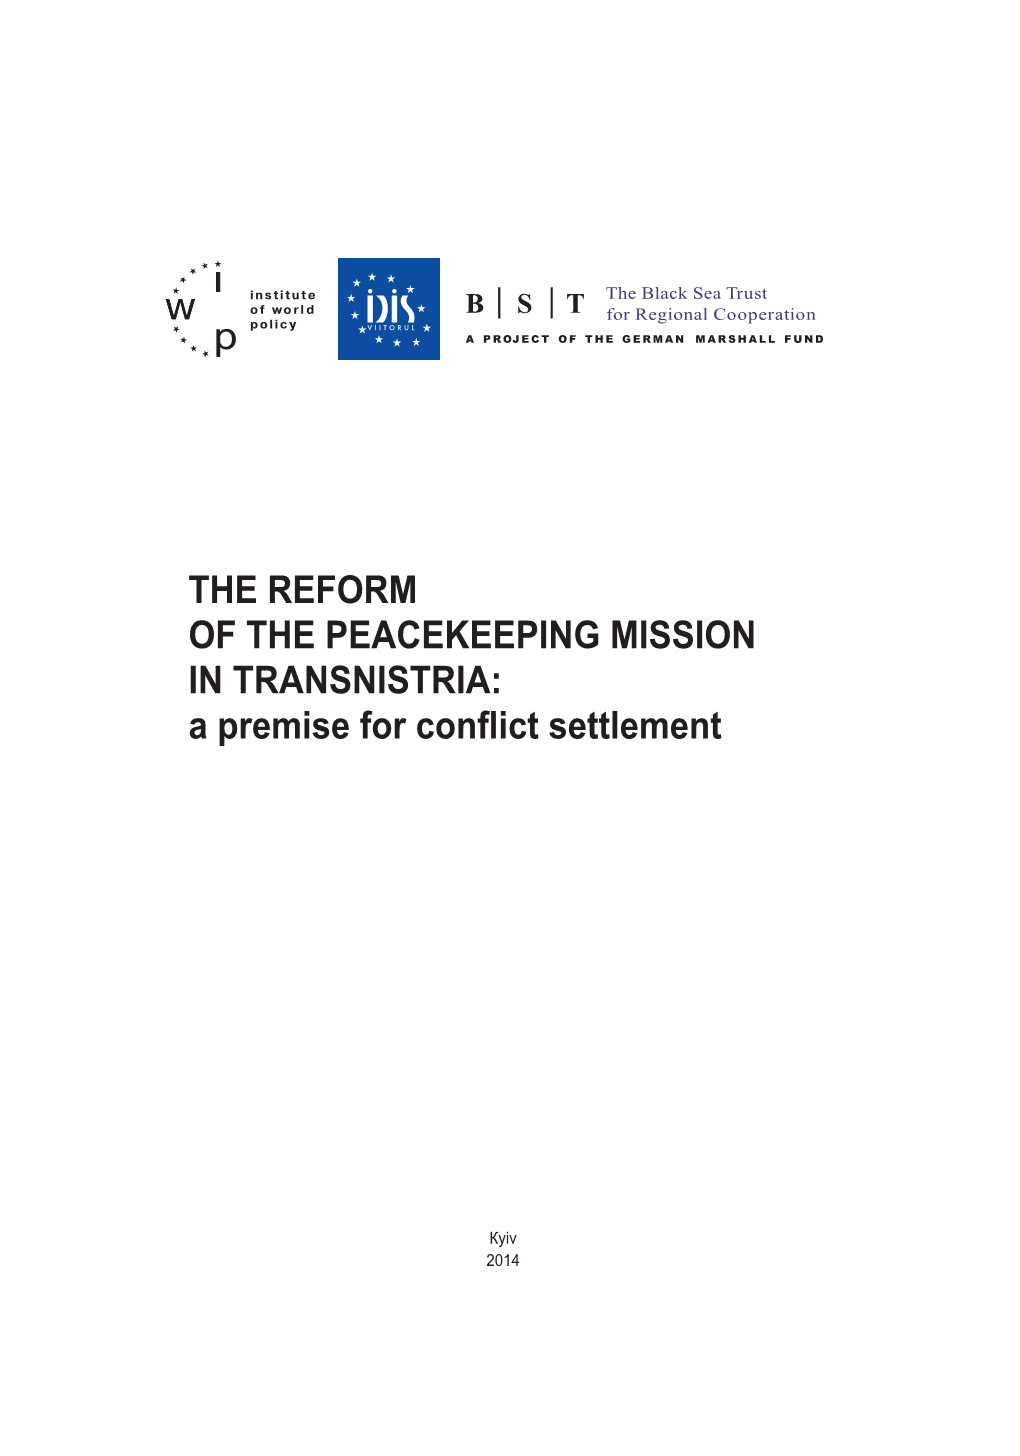 The Reform of the Peacekeeping Mission in Transnistria: a Premise for Conflict Settlement